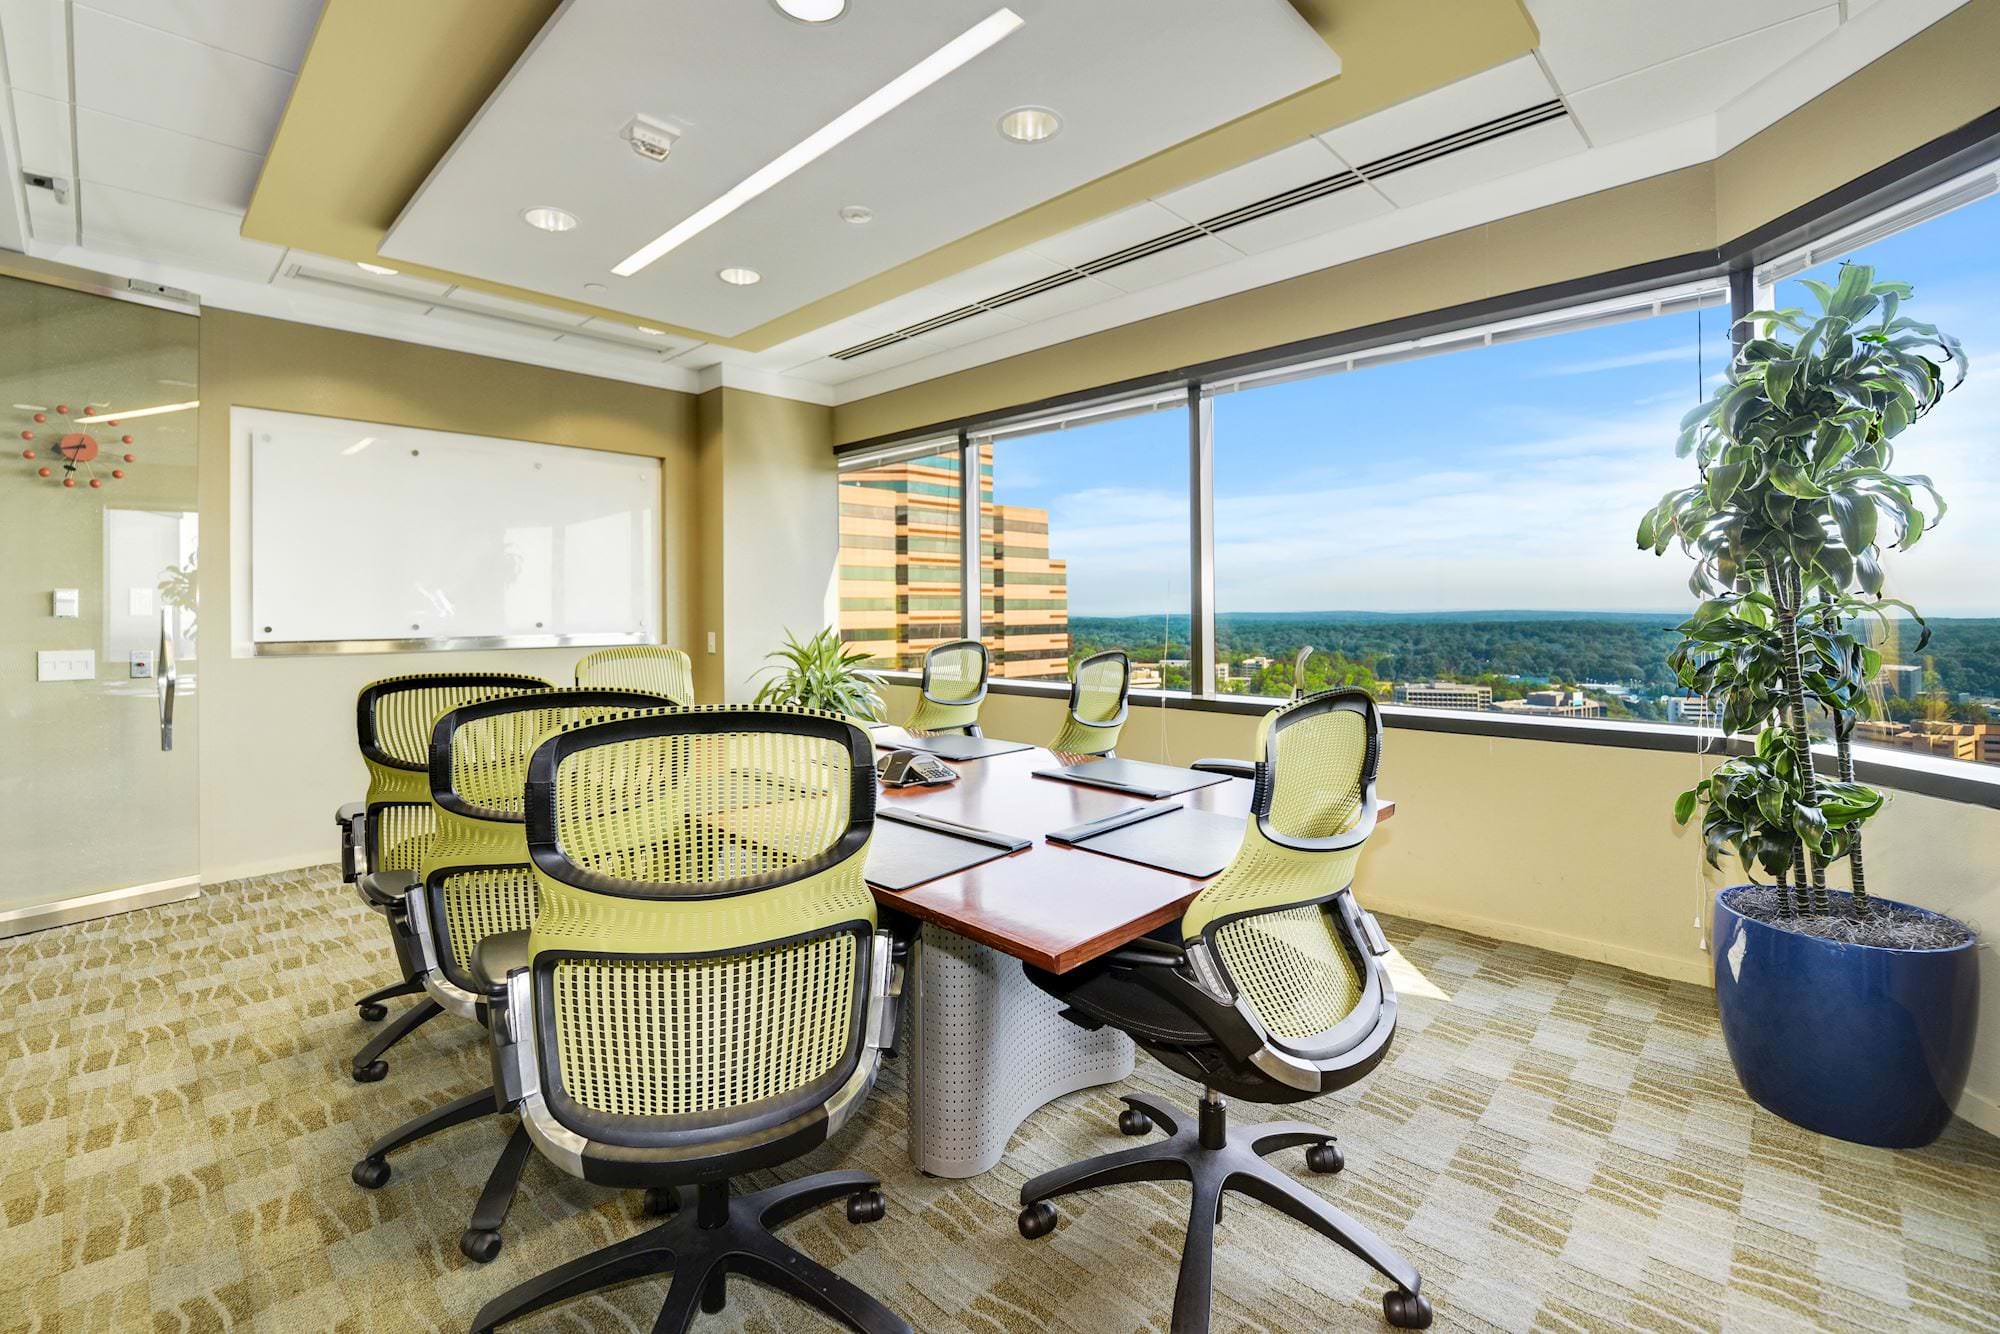 Small meeting room with a large window view of beautiful McLean, Virginia